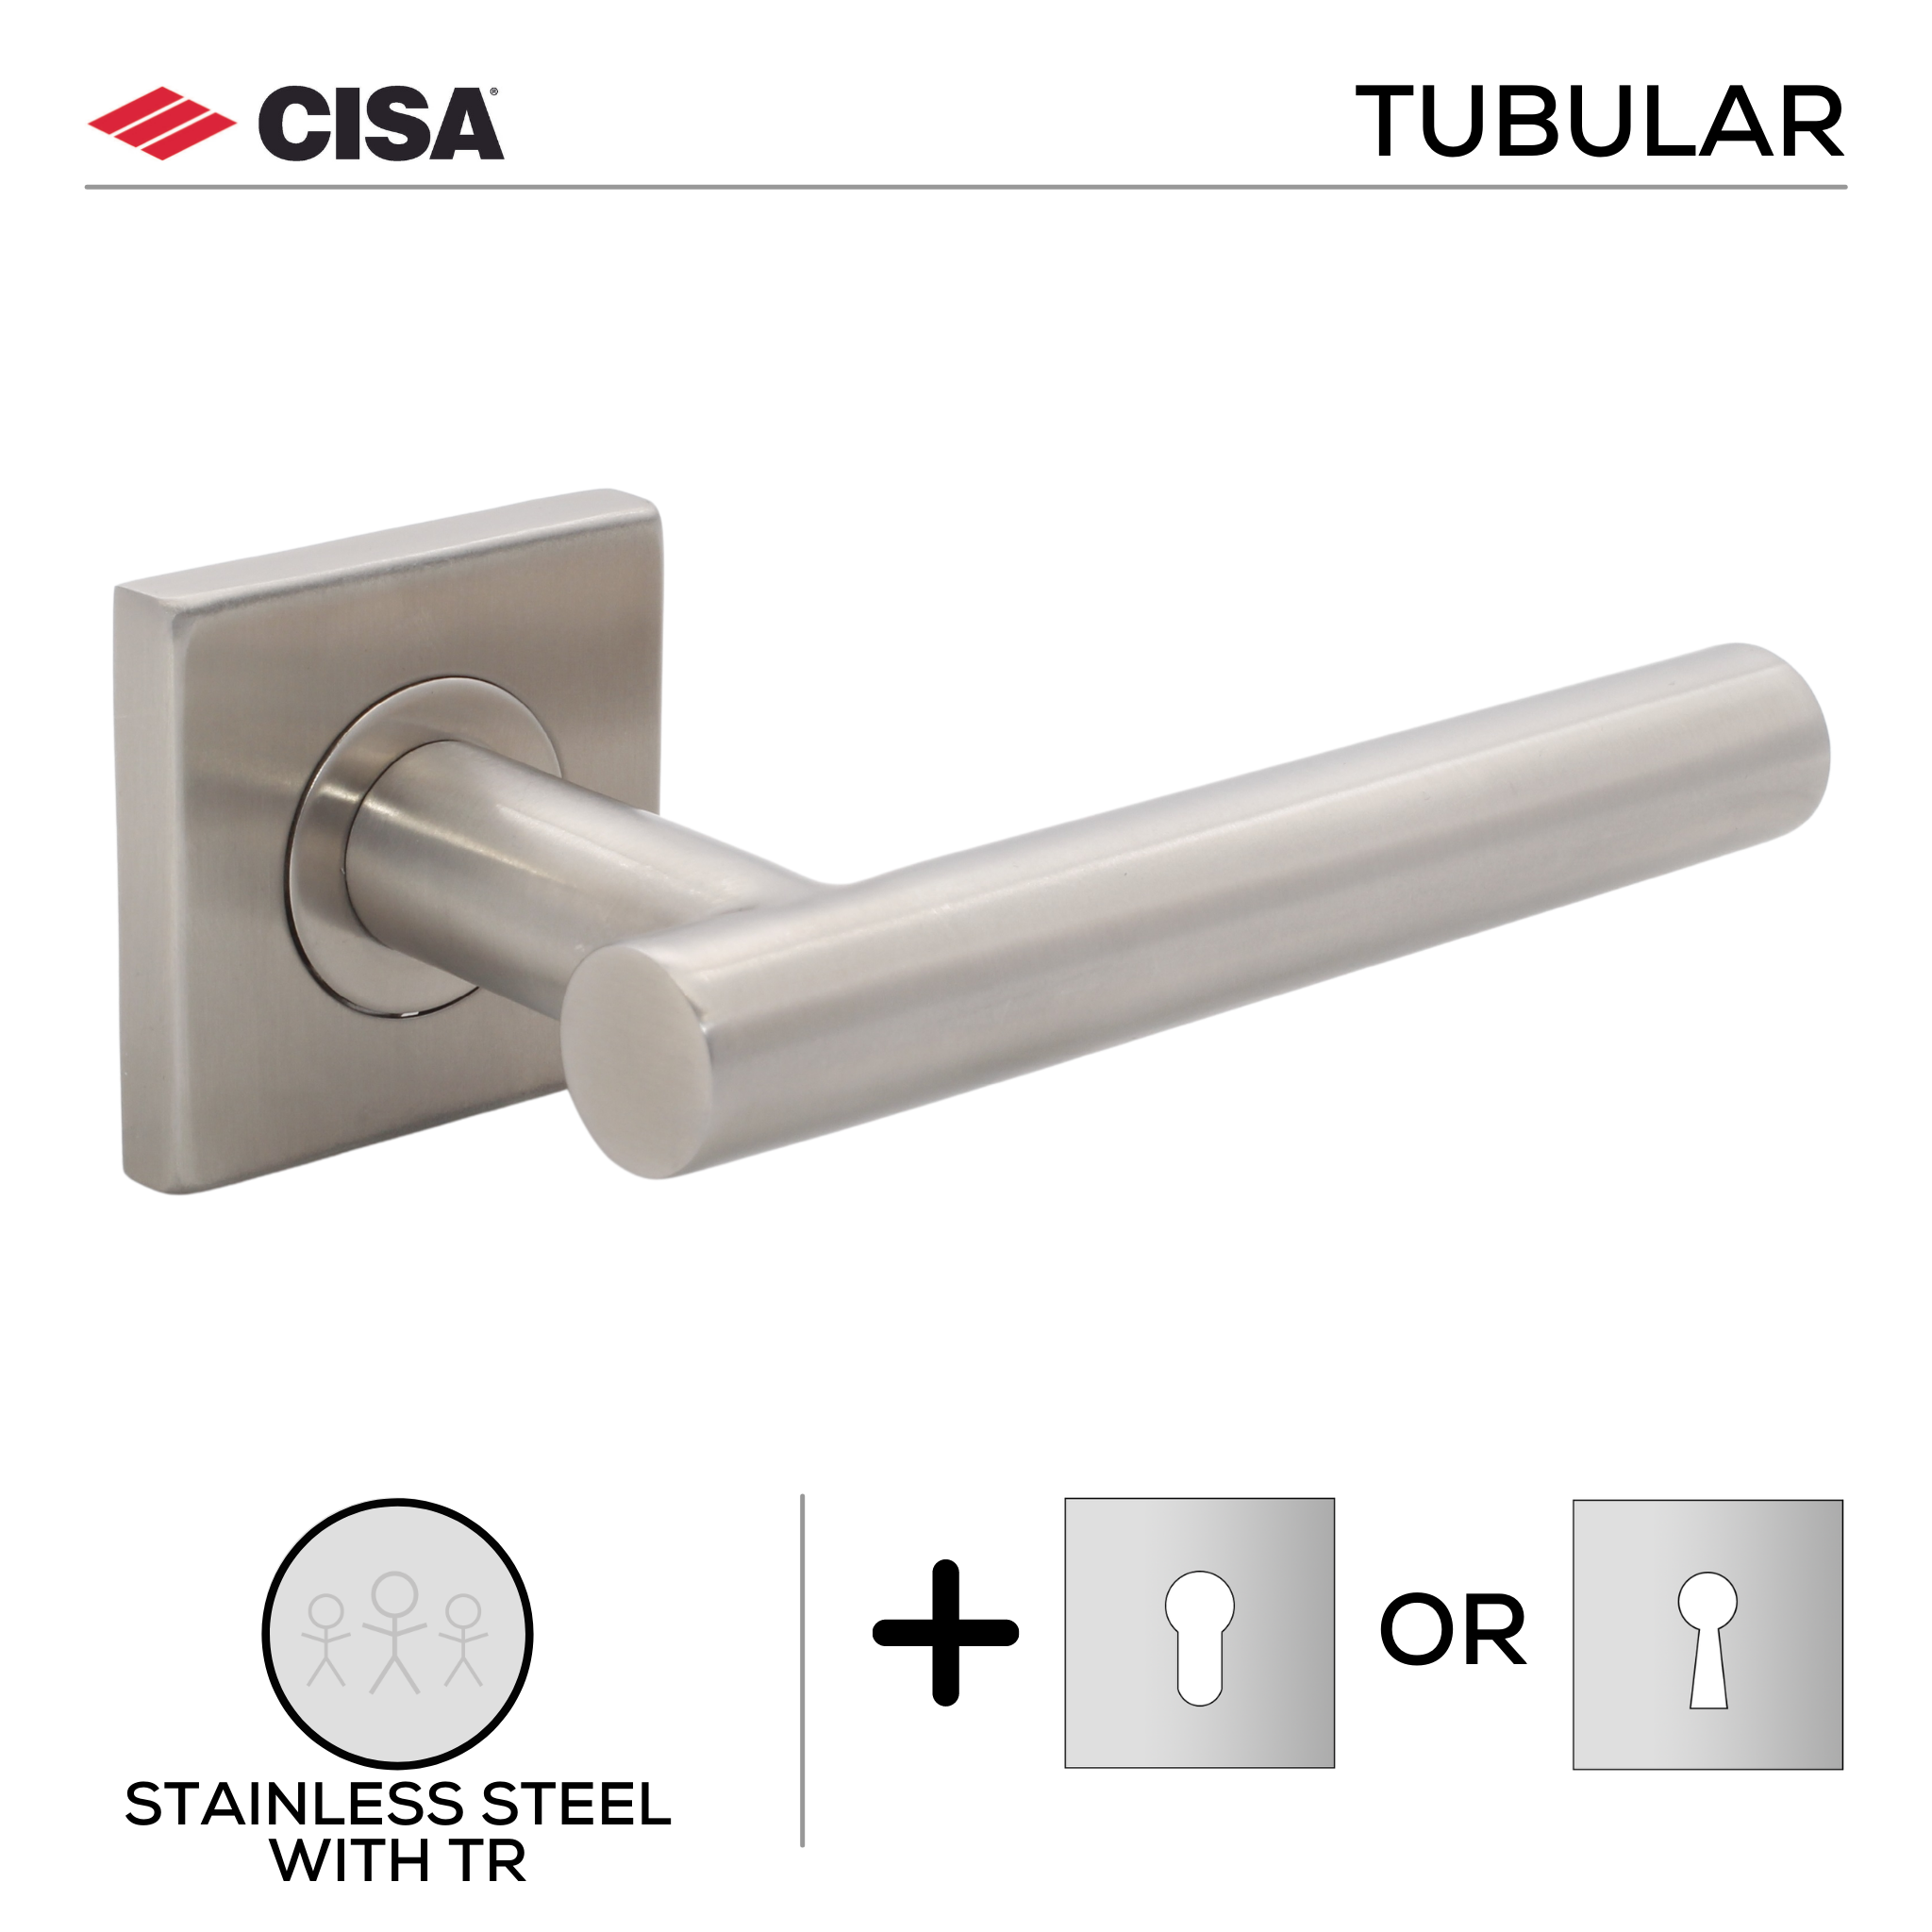 FT06.S._.TR, Lever Handles, Tubular, On Square Rose, With Escutcheons, 134mm (l), Stainless Steel with Tarnish Resistant, CISA